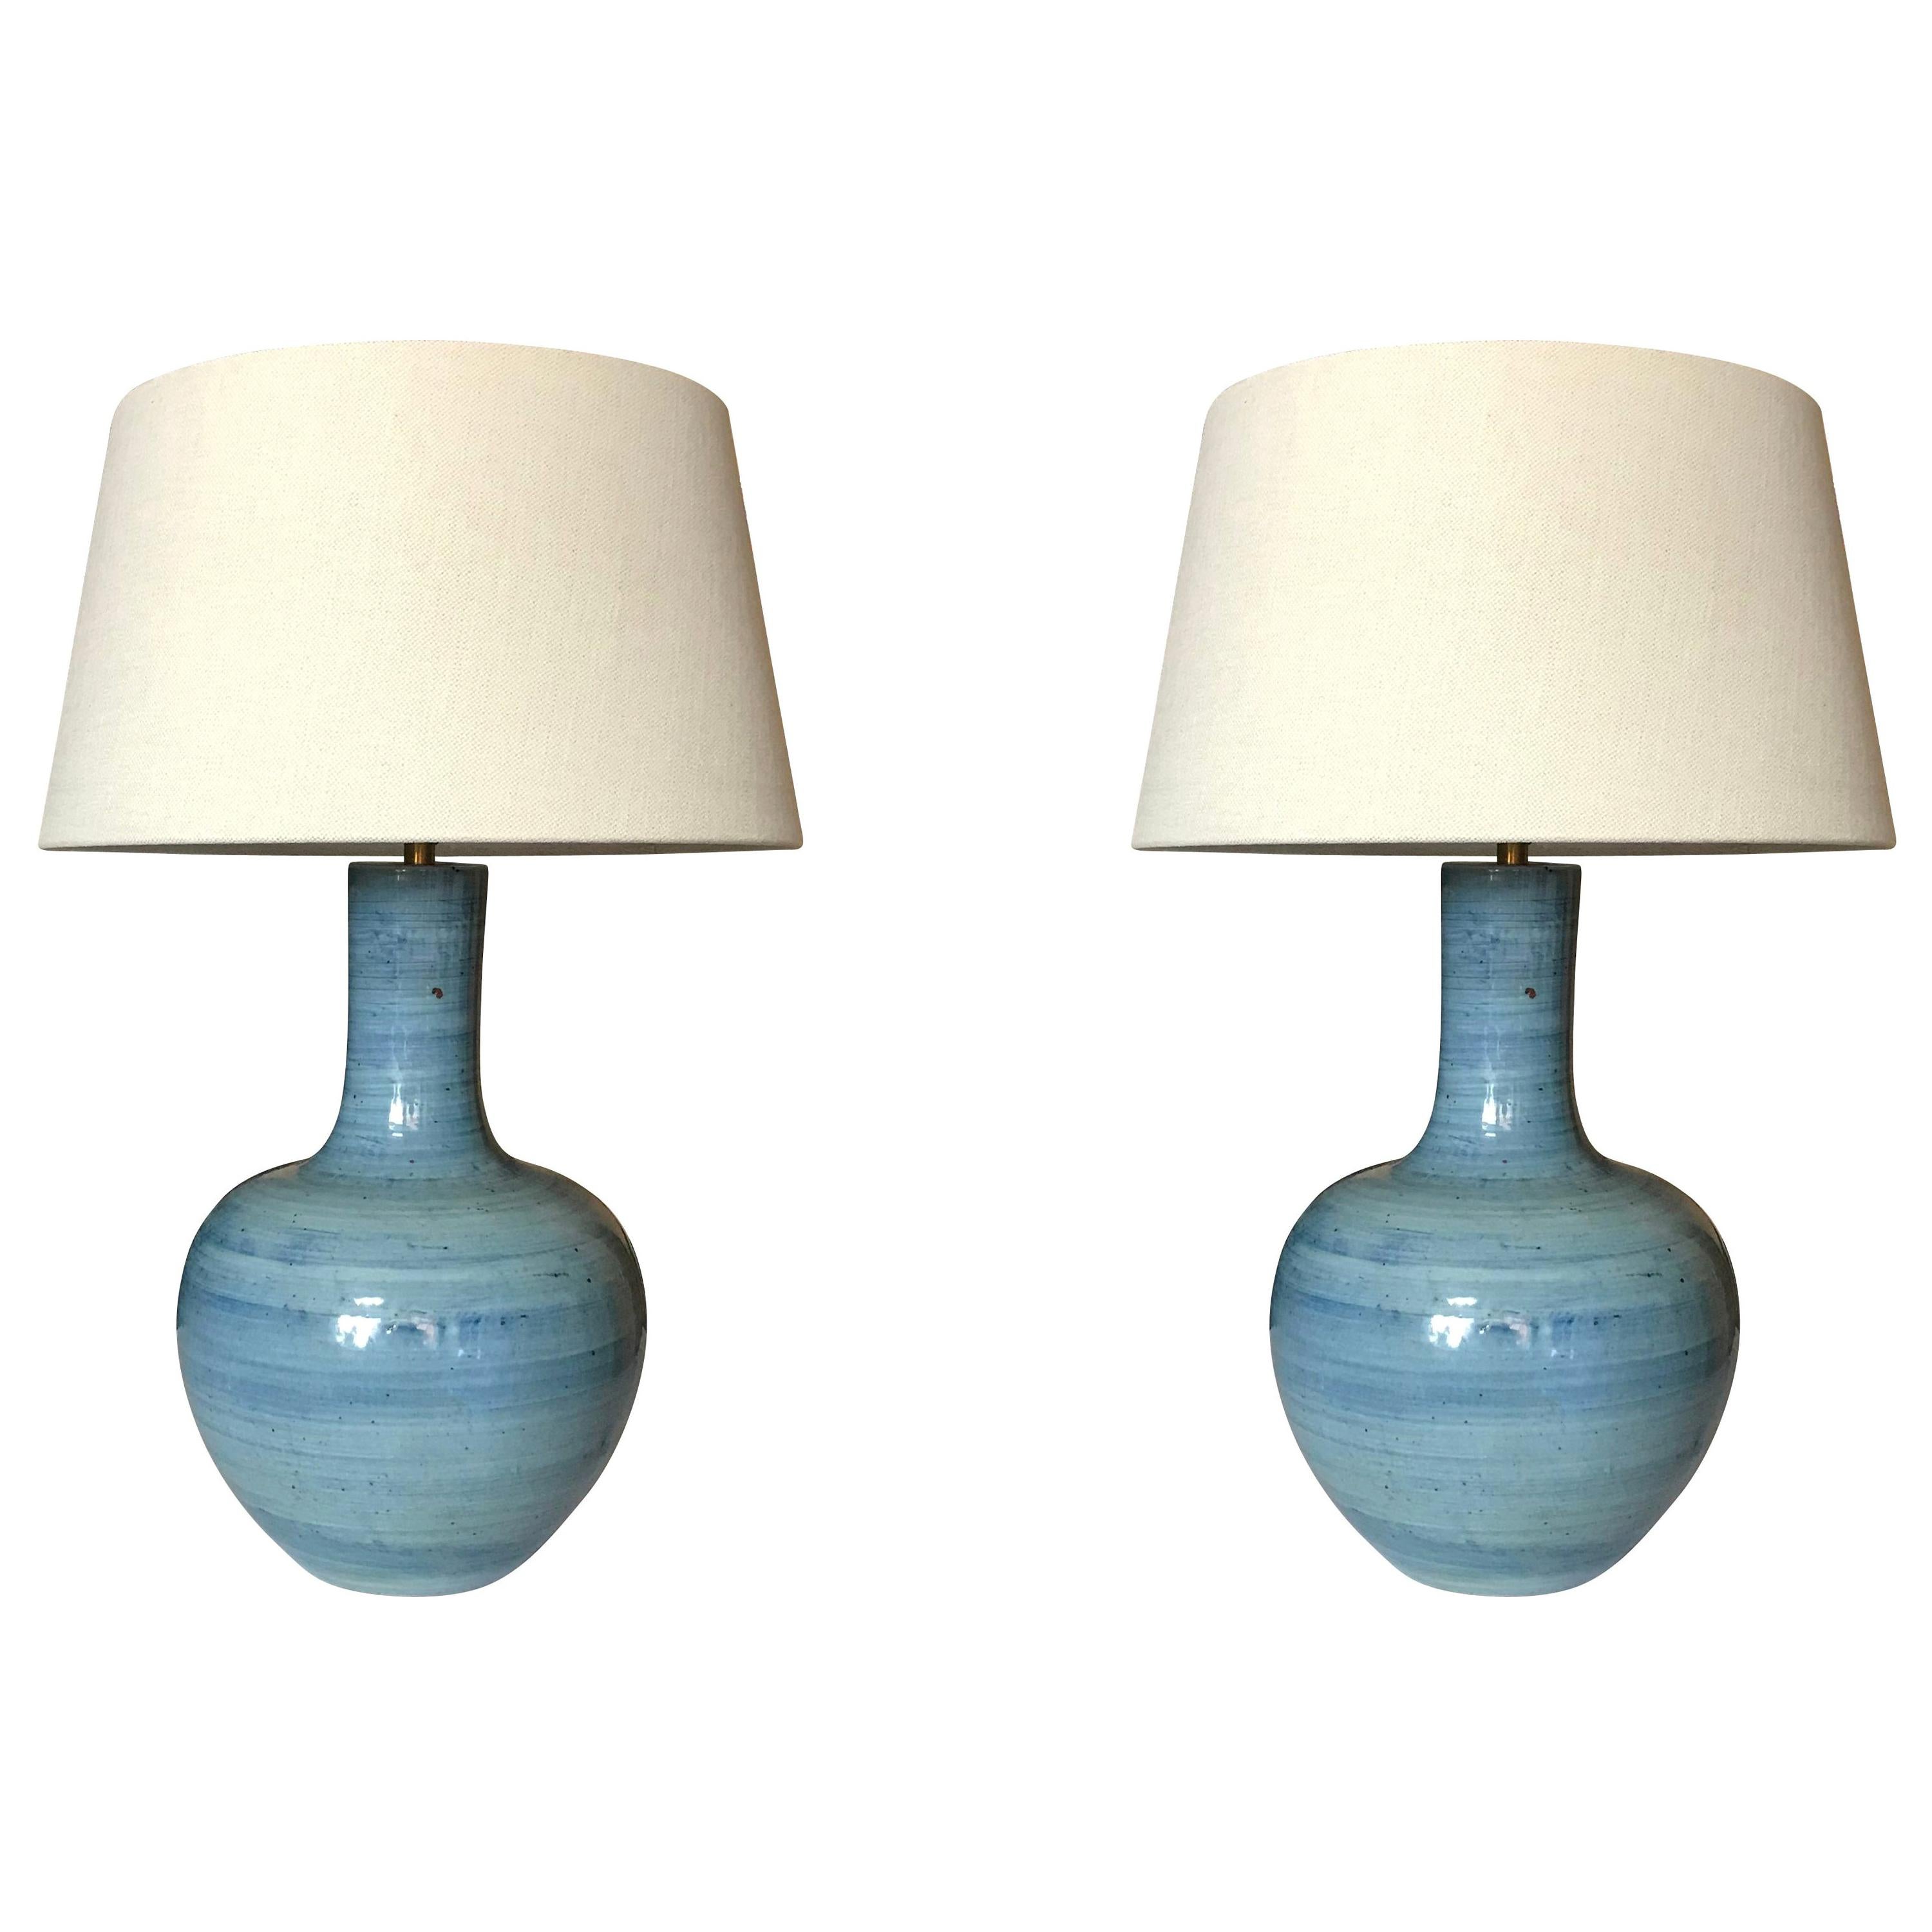 Blue Horizontal Pattern Pair of Large Lamps, China, Contemporary